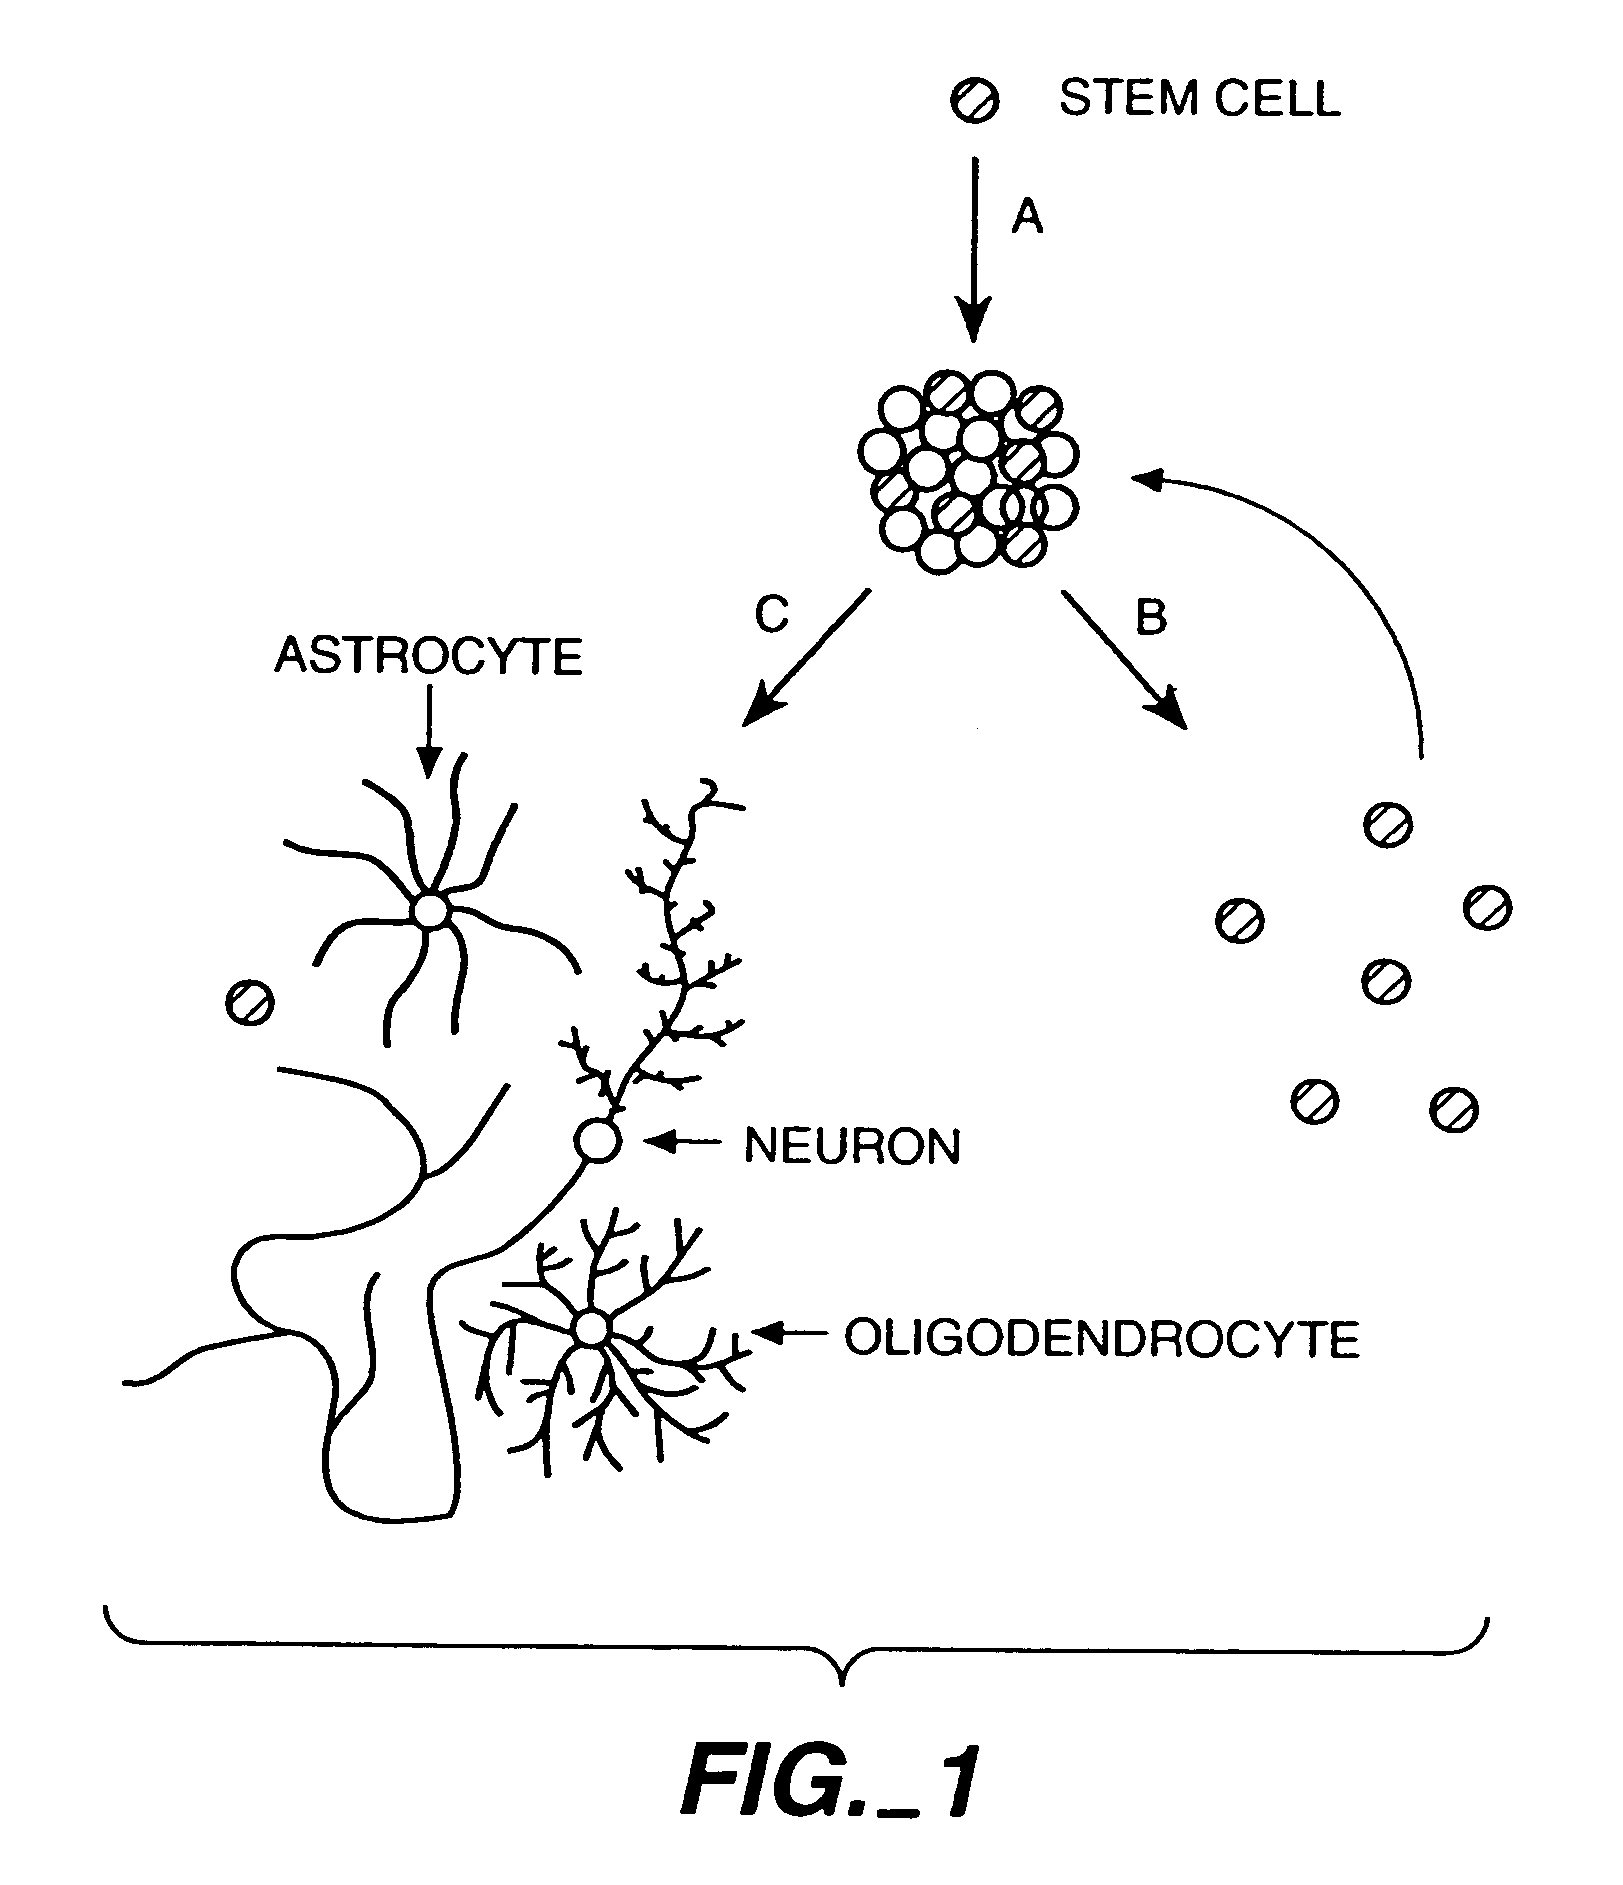 Methods of proliferating undifferentiated neural cells